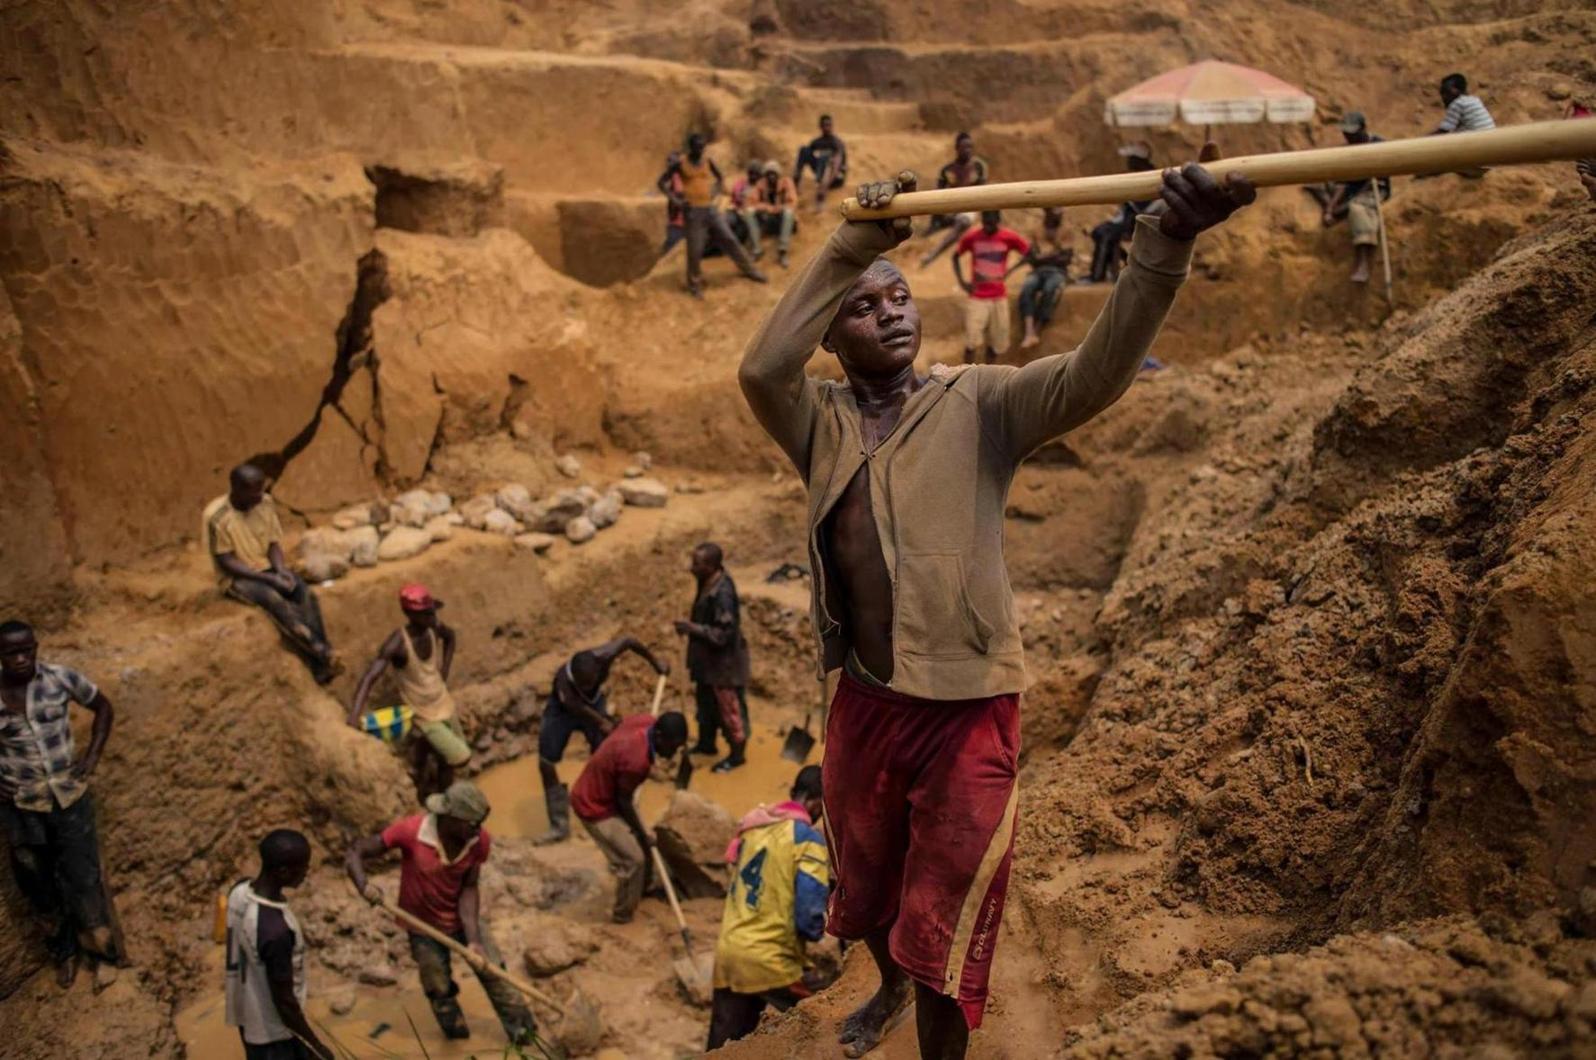 Blood diamonds: How do they fuel violence, and what Africa is doing to curb this